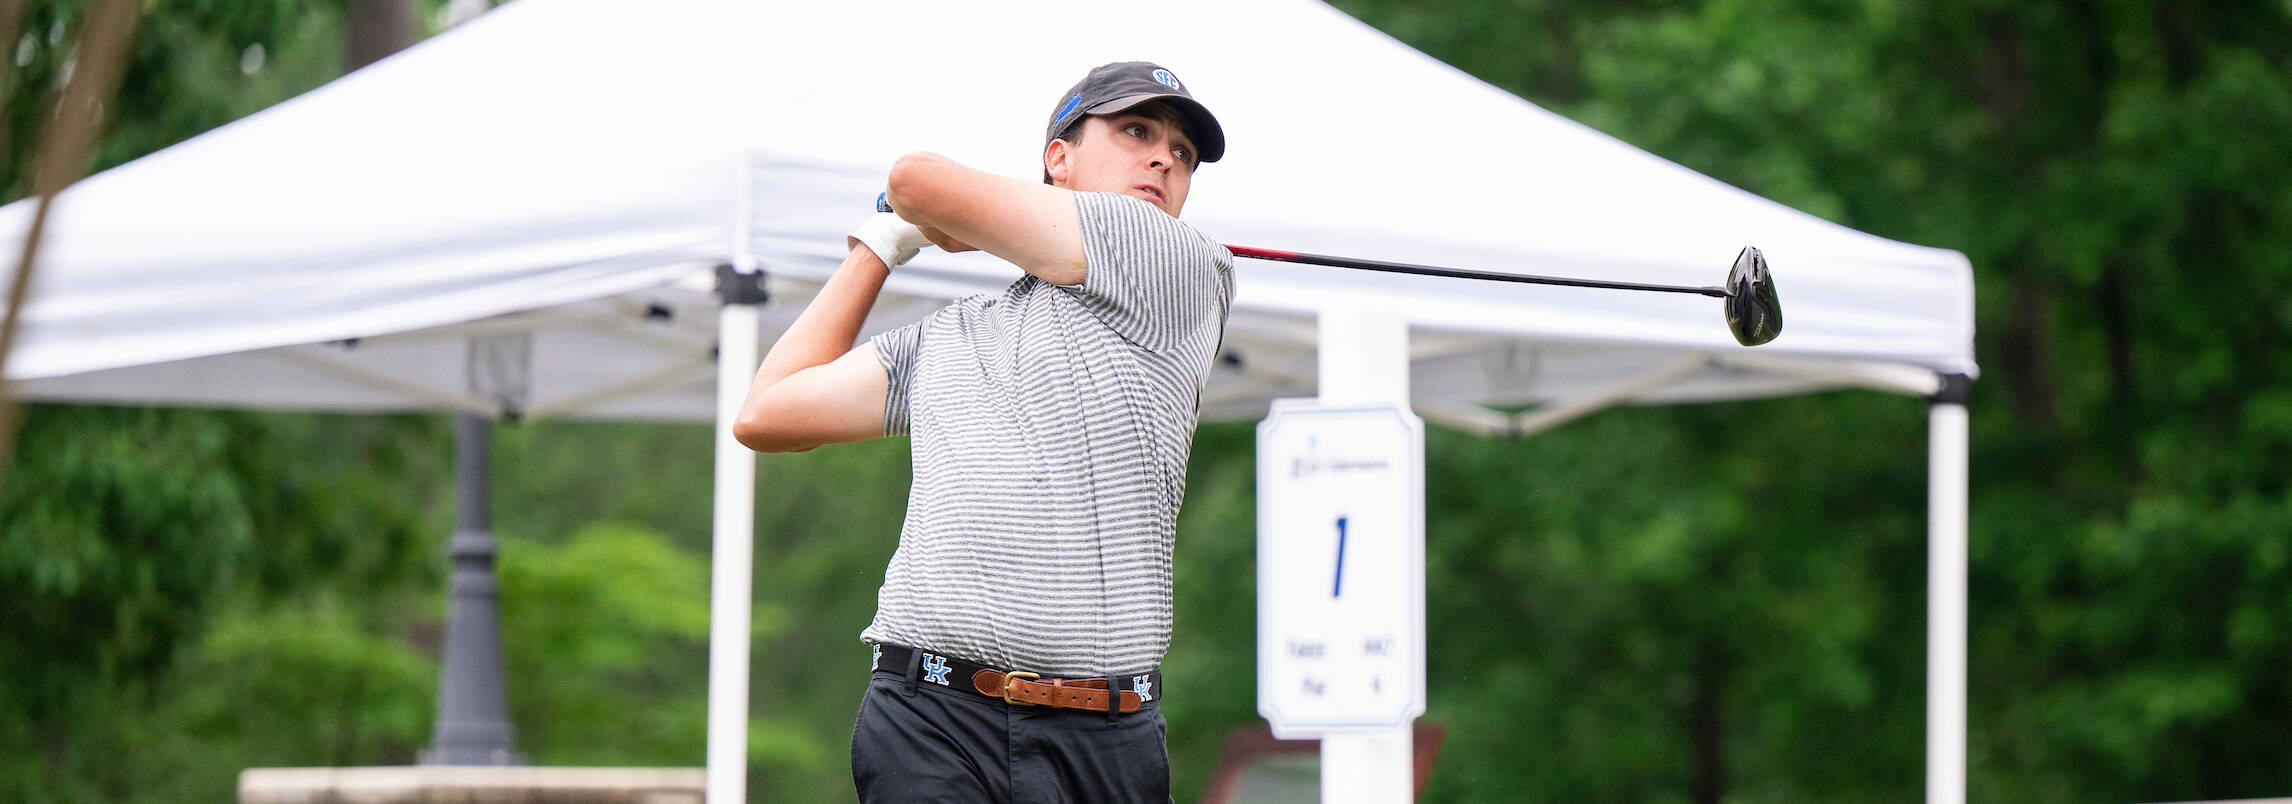 Alex Goff Tied for Eighth with 18 Holes to Play at Auburn Regional